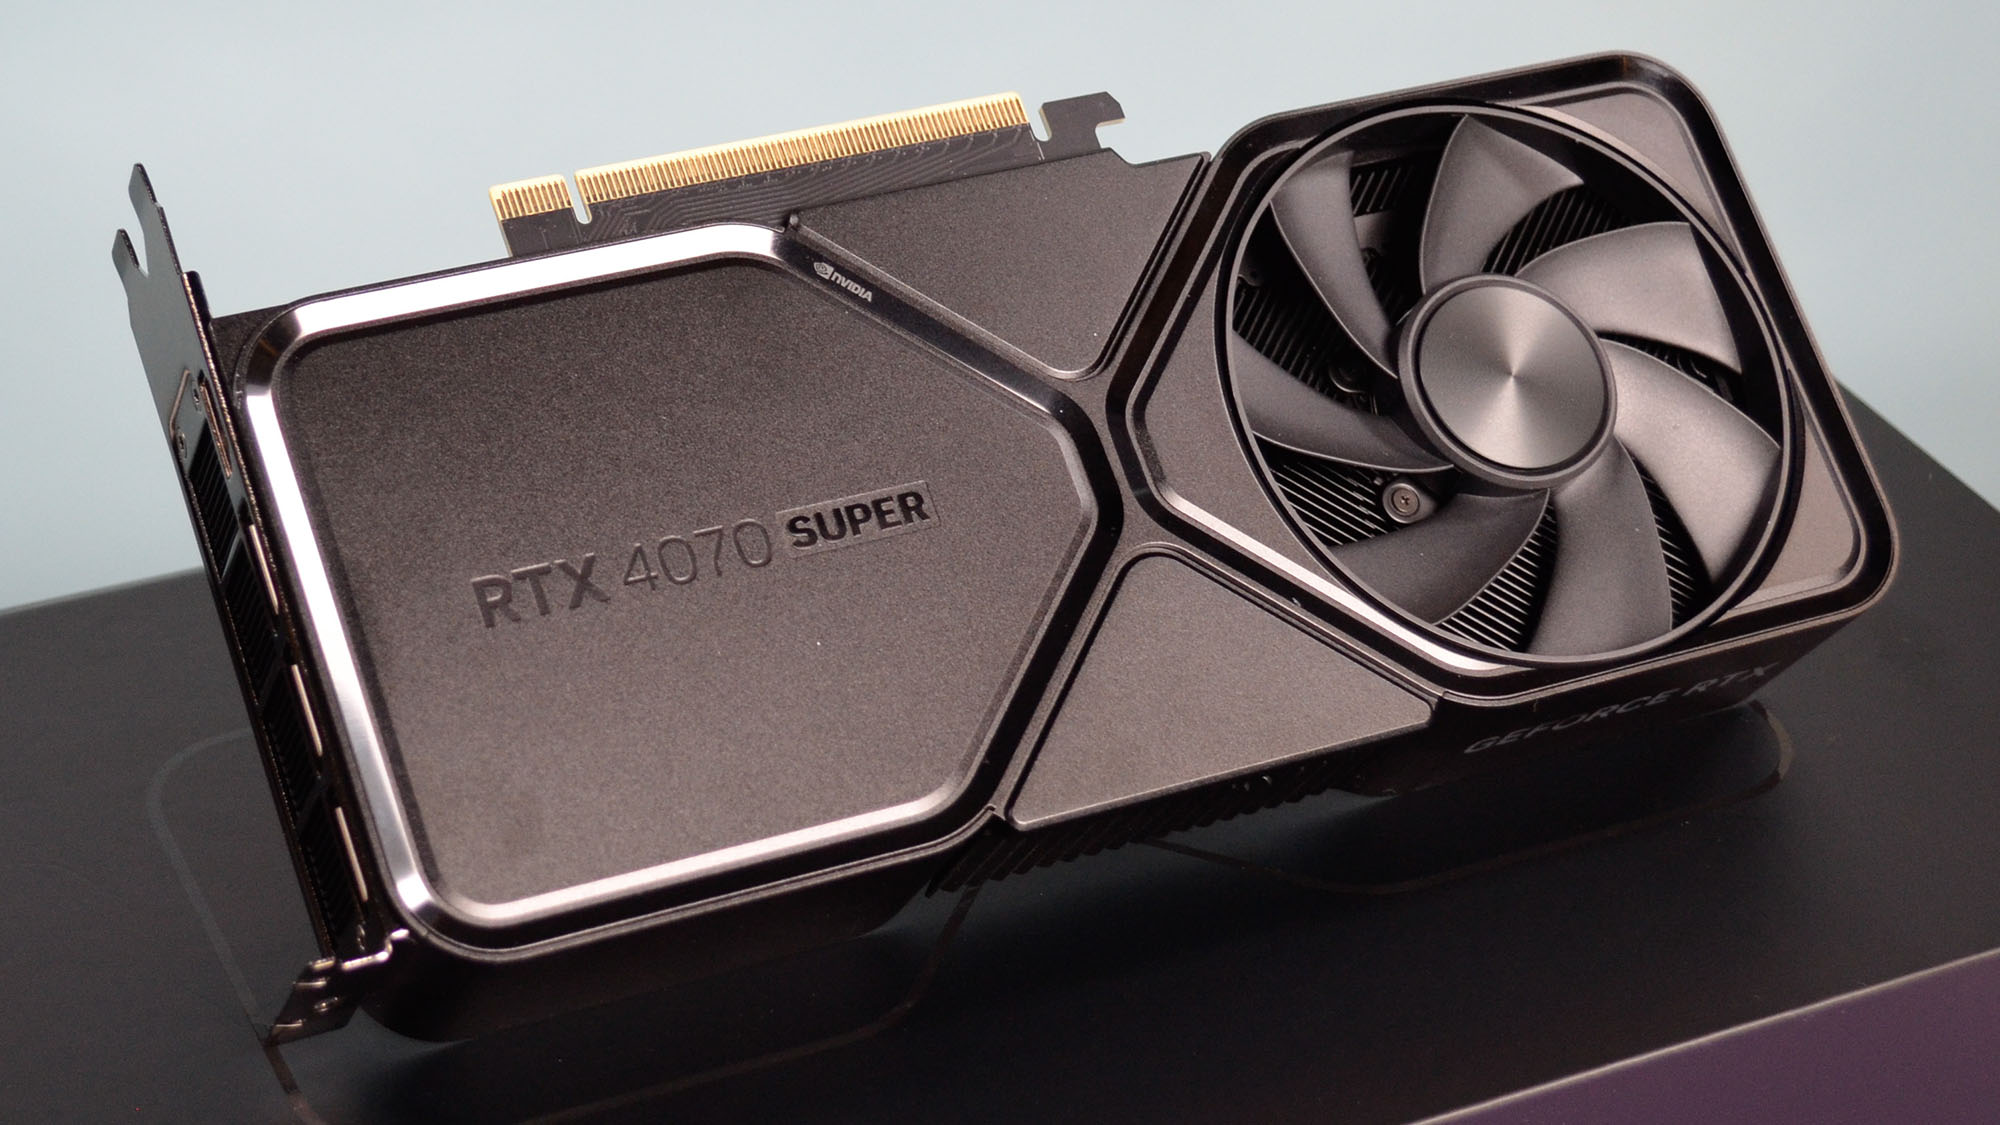 Game On: How the 4070 Super is Redefining Gaming Graphics缩略图